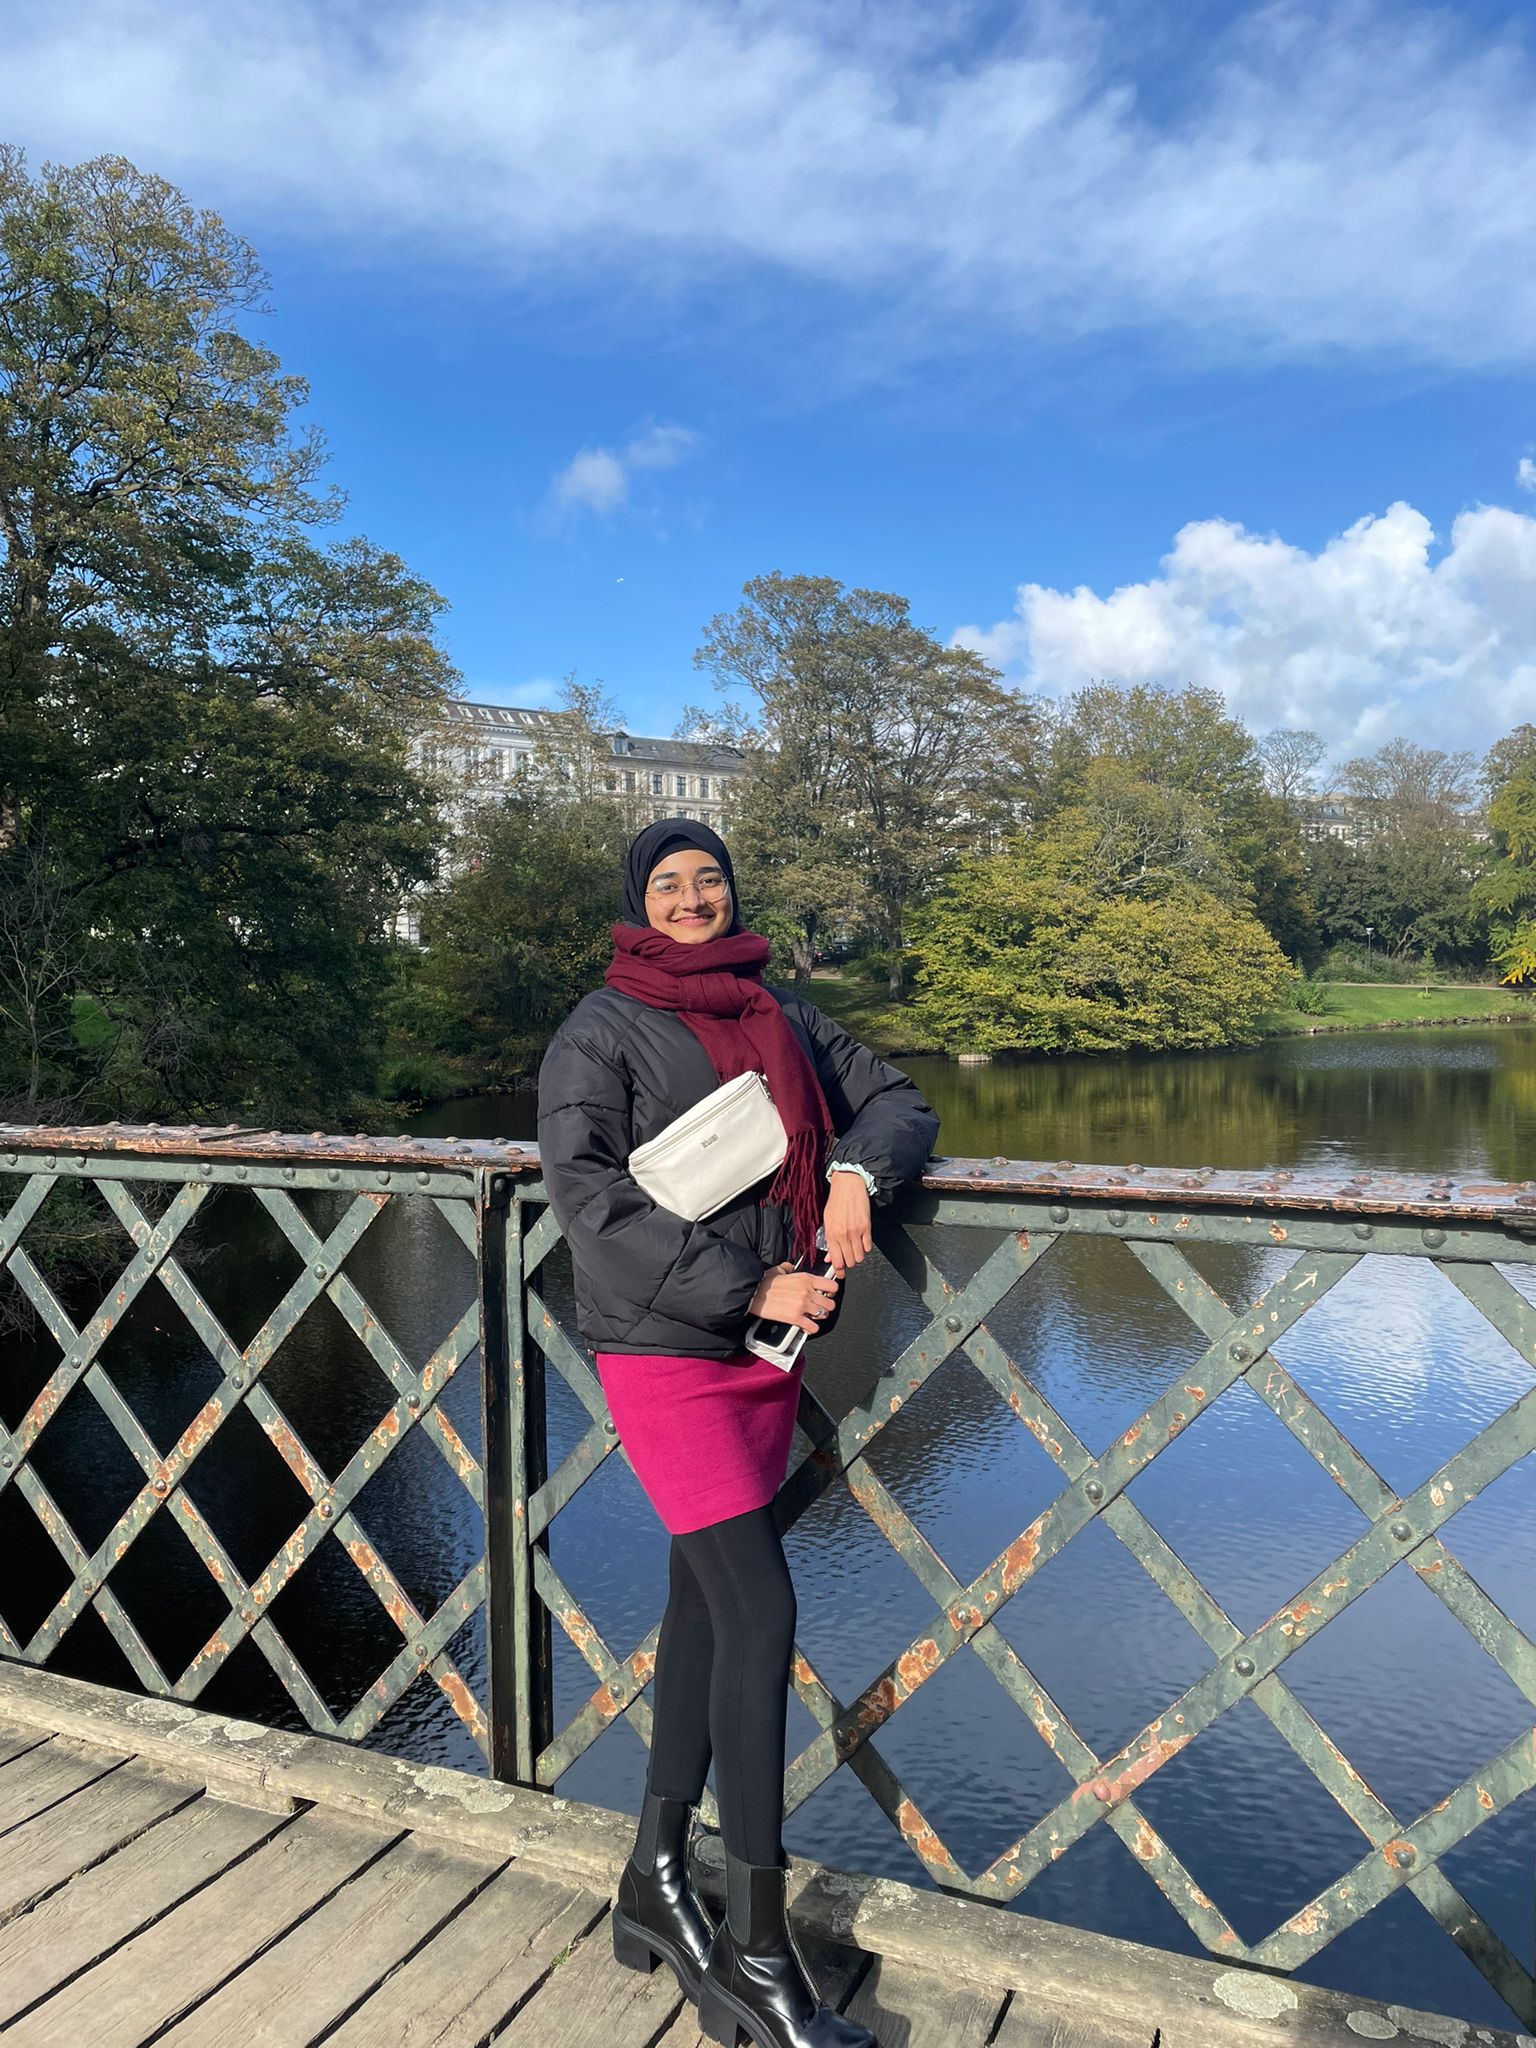 First-hand Experience in the EU-CONEXUS Bachelor Minor Programme: Fatima’s Story